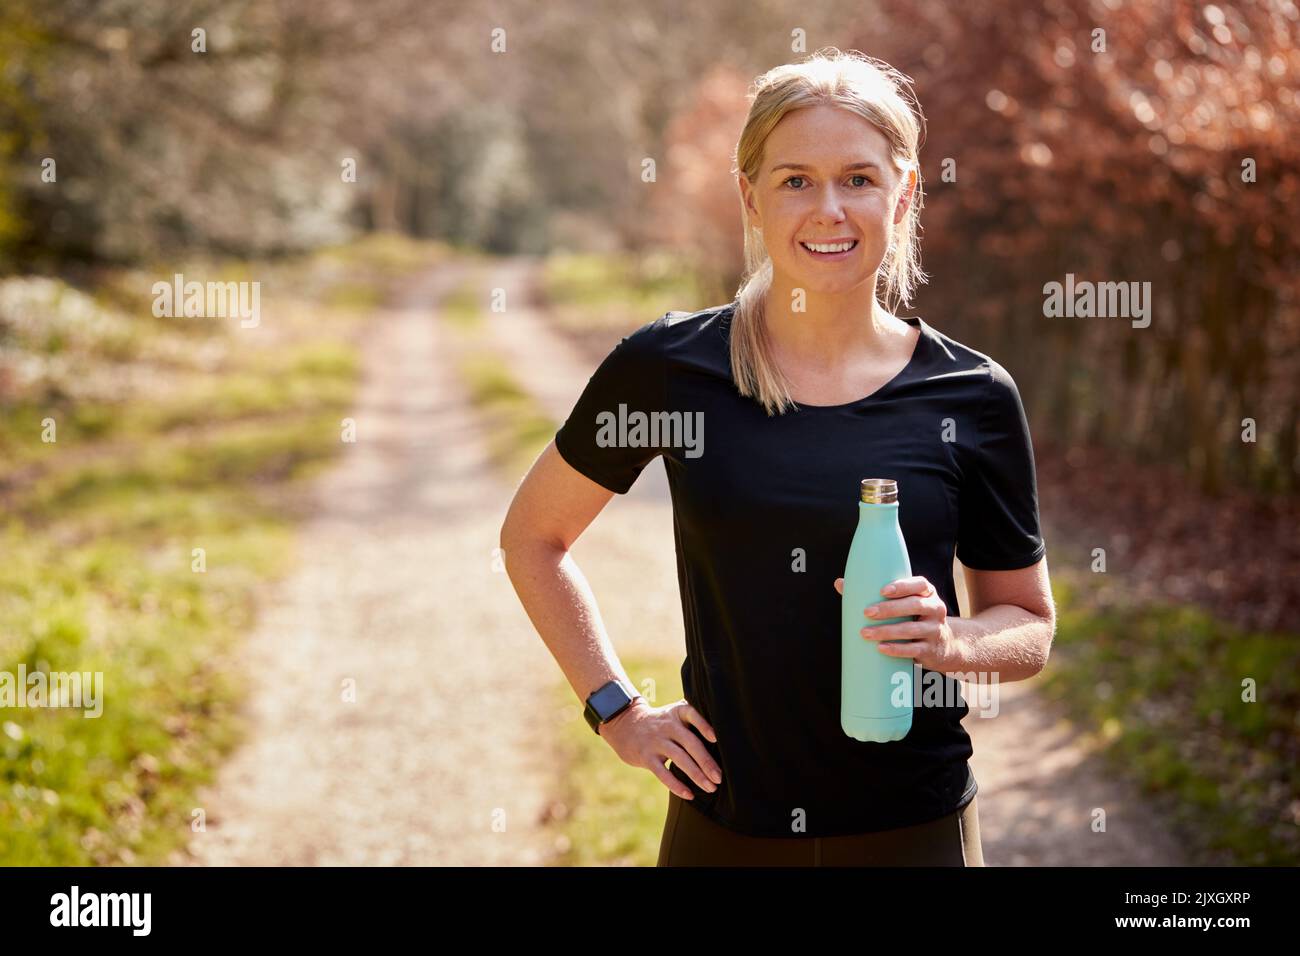 Portrait Of Woman With Water Bottle In Autumn Countryside On Run To Improve Mental Health Stock Photo